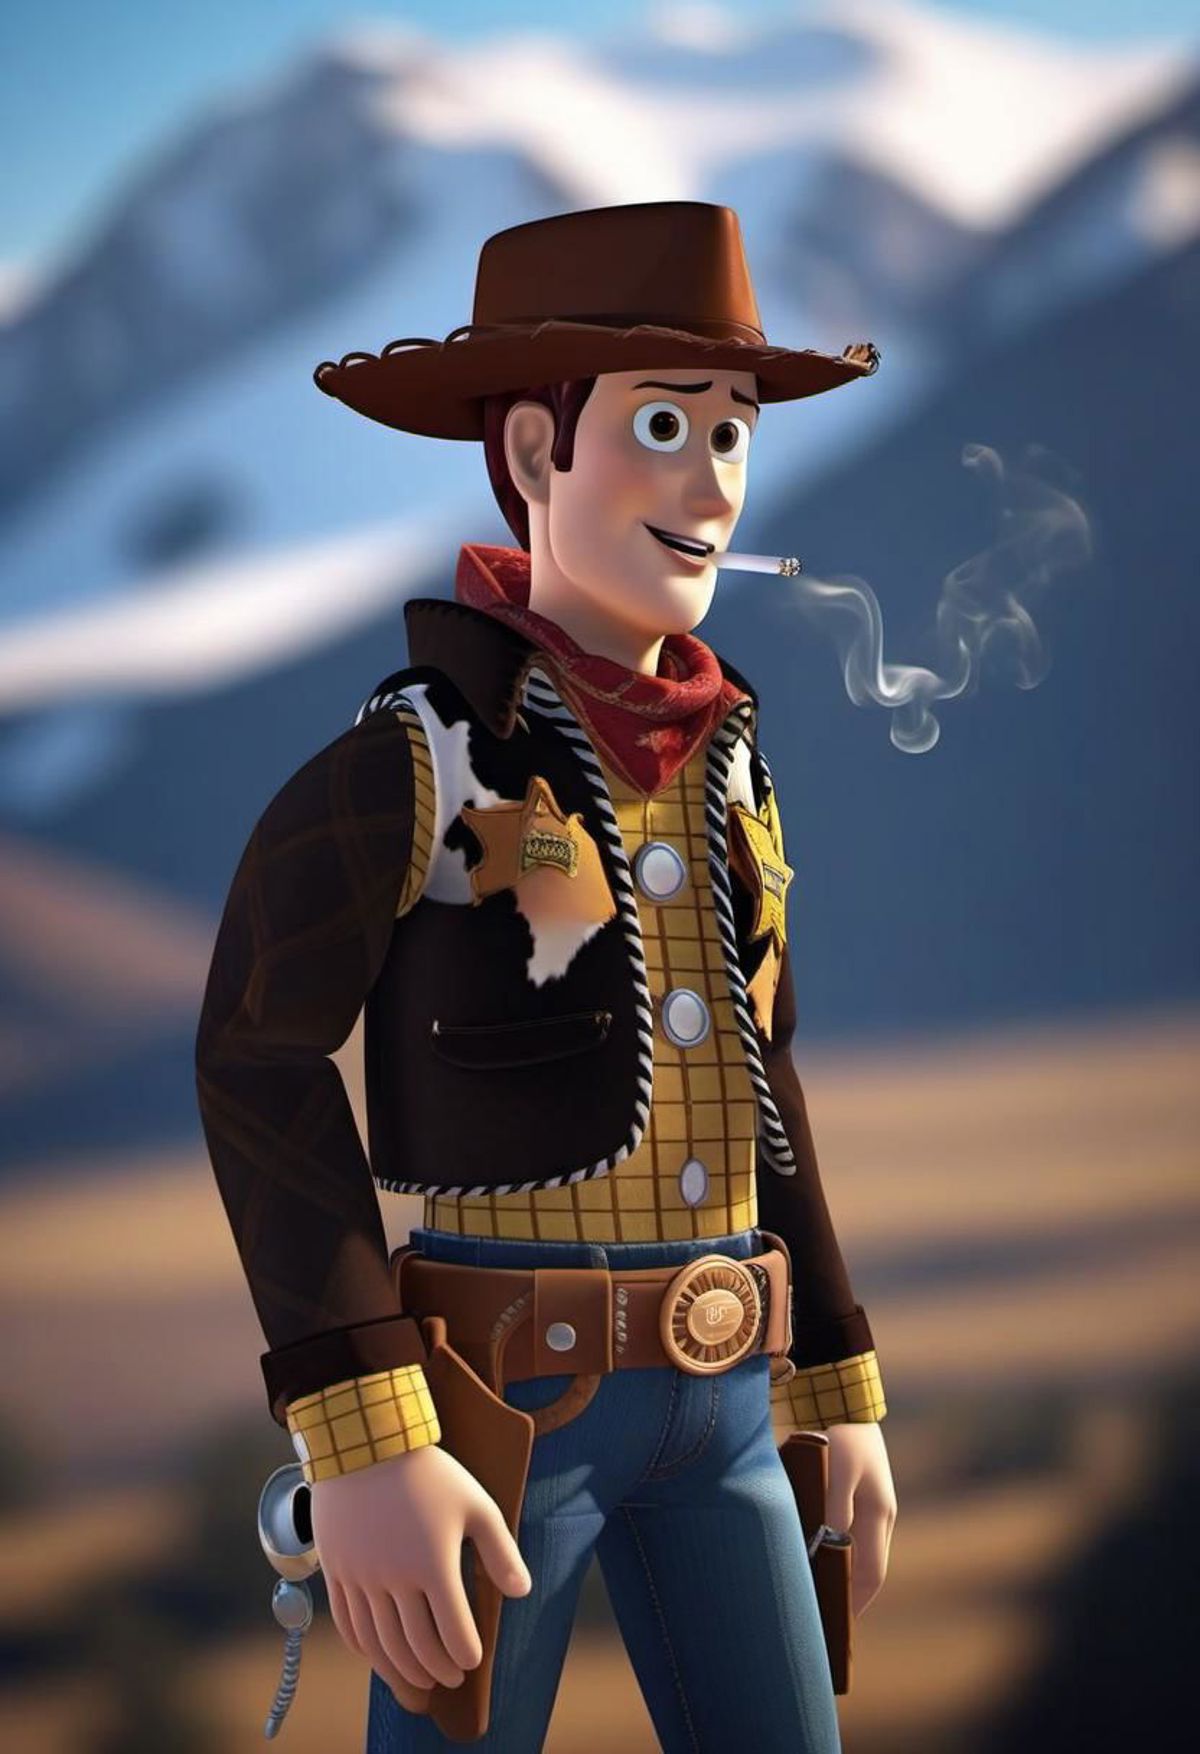 Sheriff Woody - Toy Story - SDXL image by Red_Raven